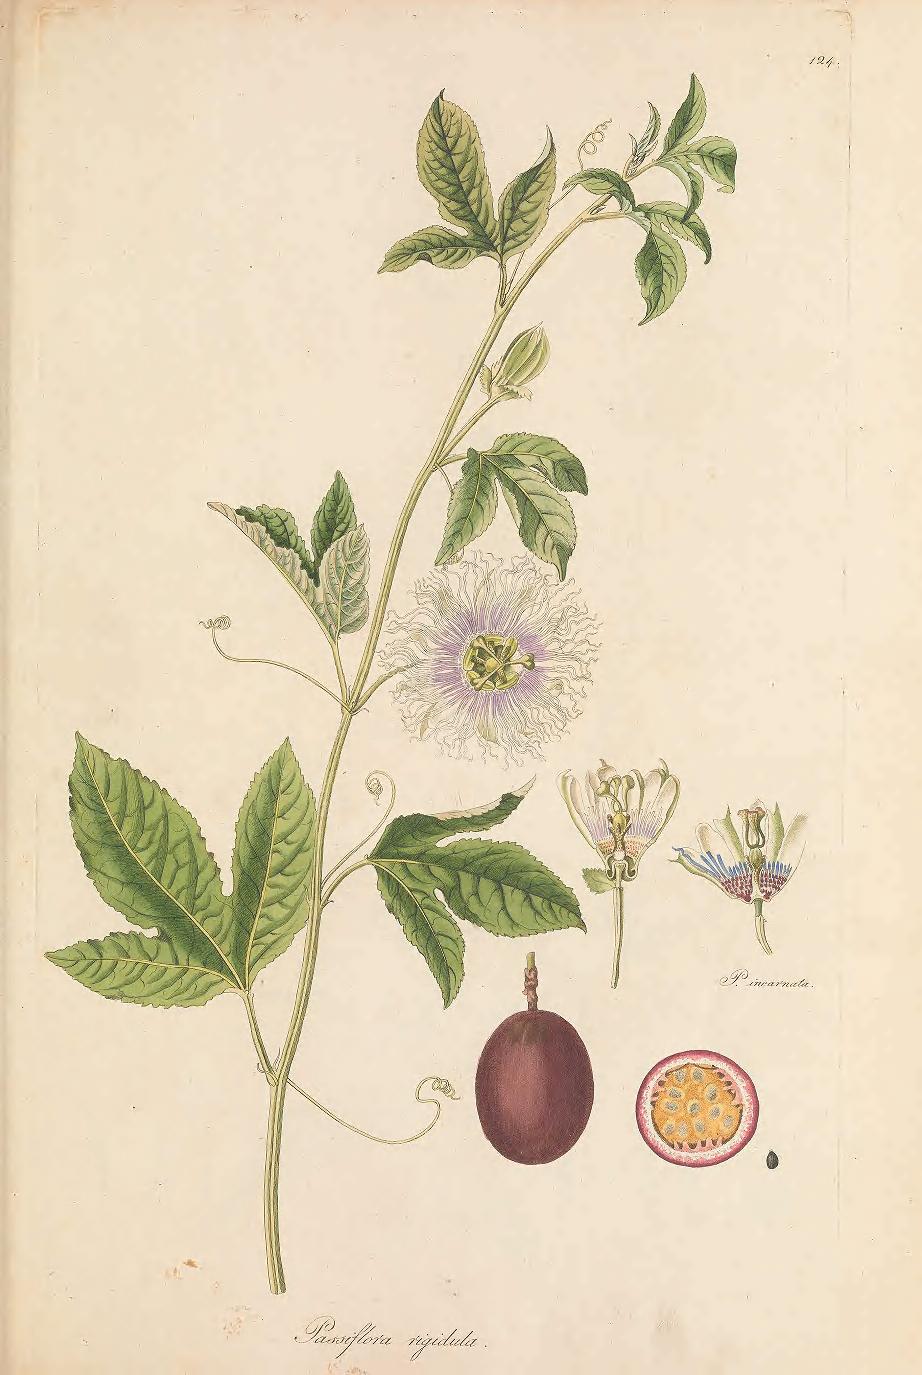 Illustration of Passionflower by Joseph Franz Jacquin, E. Fenzl, and I. Schreibers